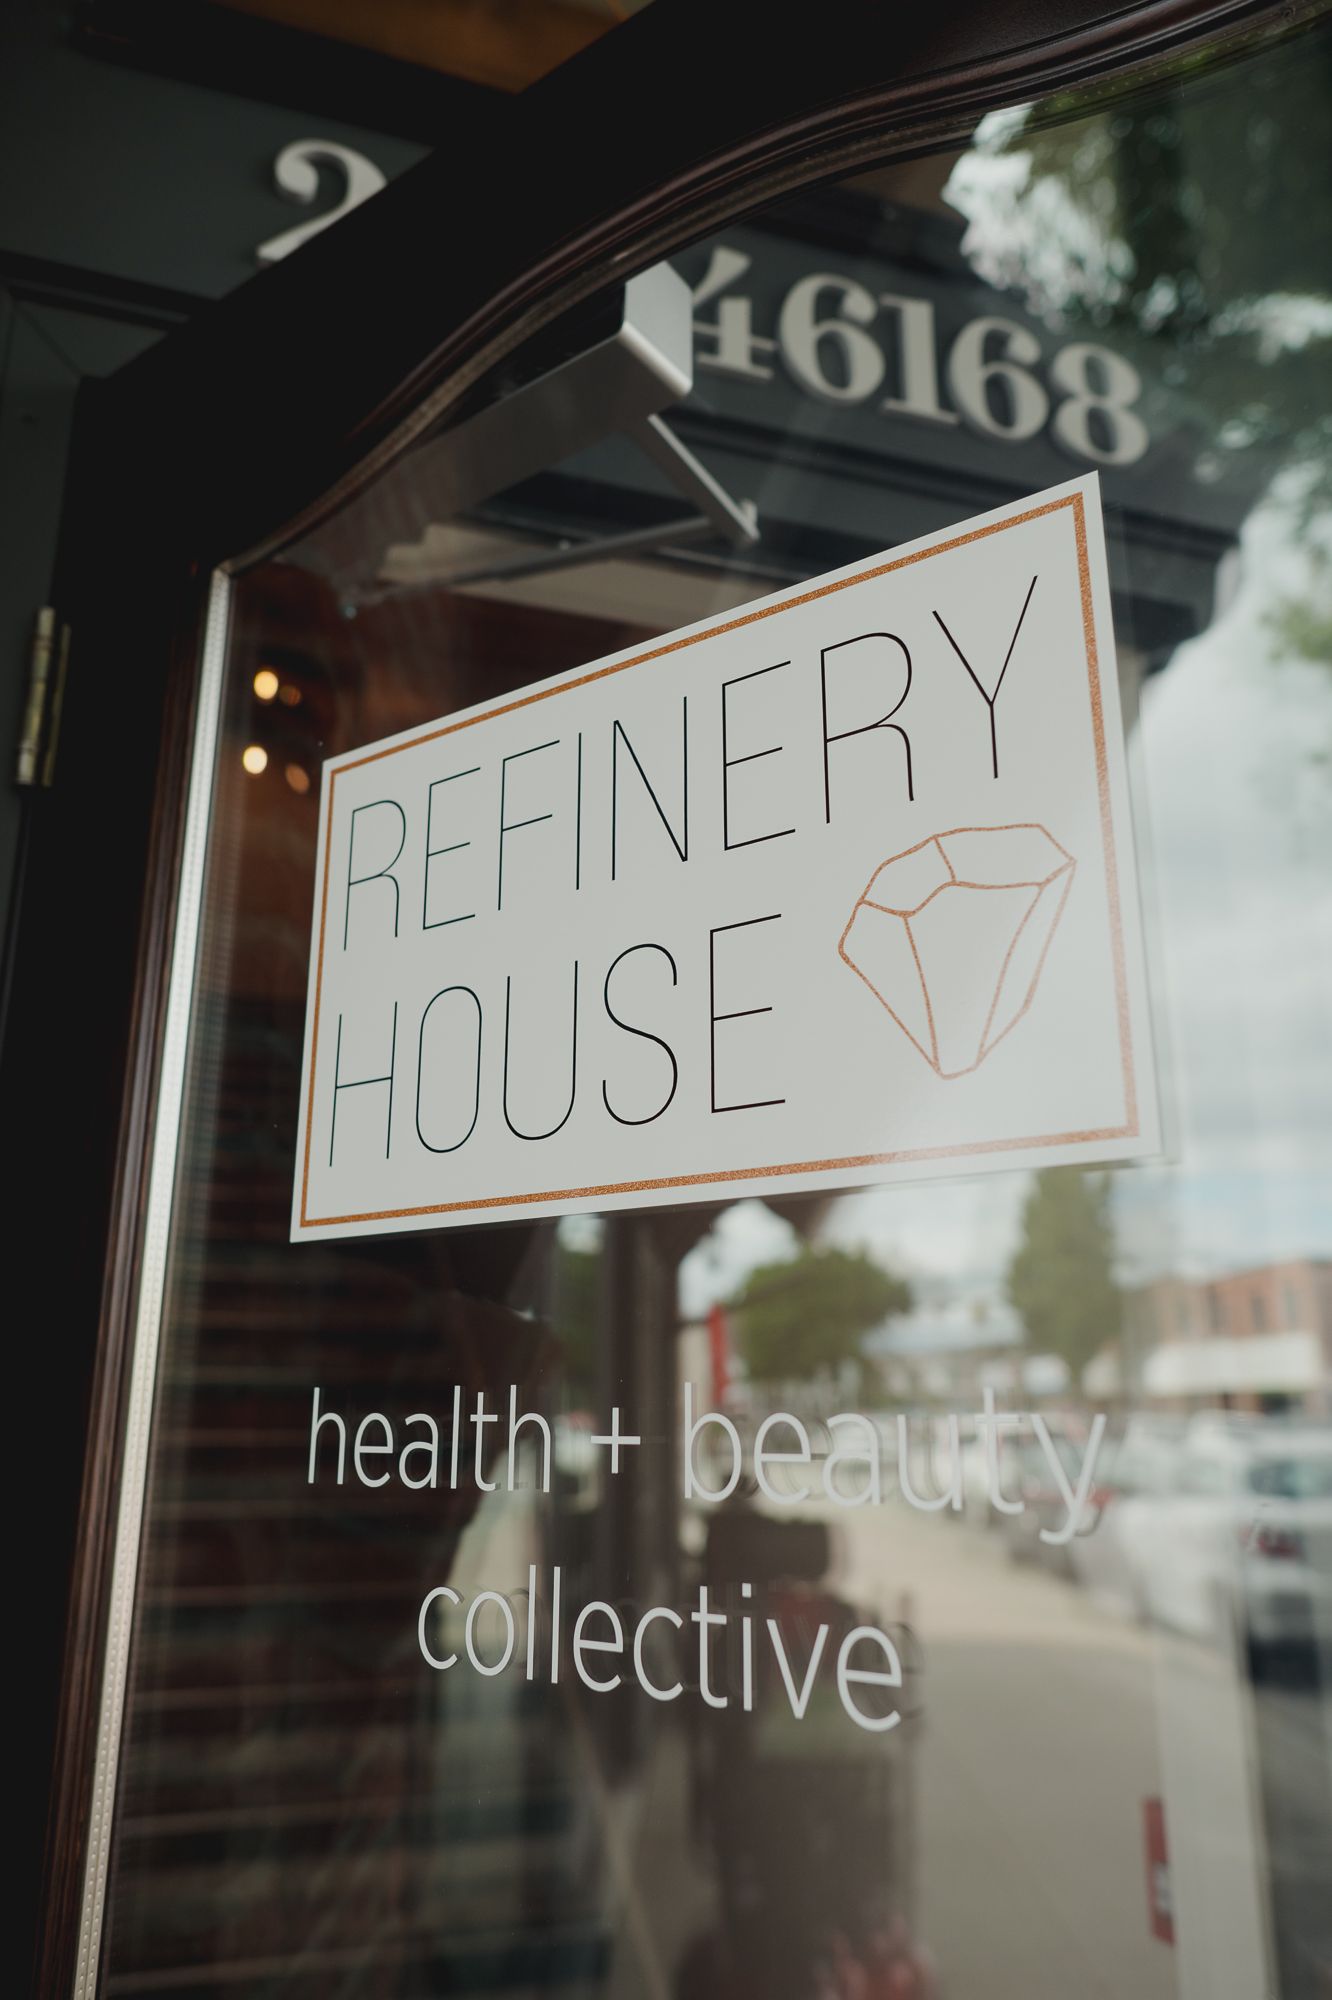 Hair + Facial Services and Healthcare Professionals - Refinery House